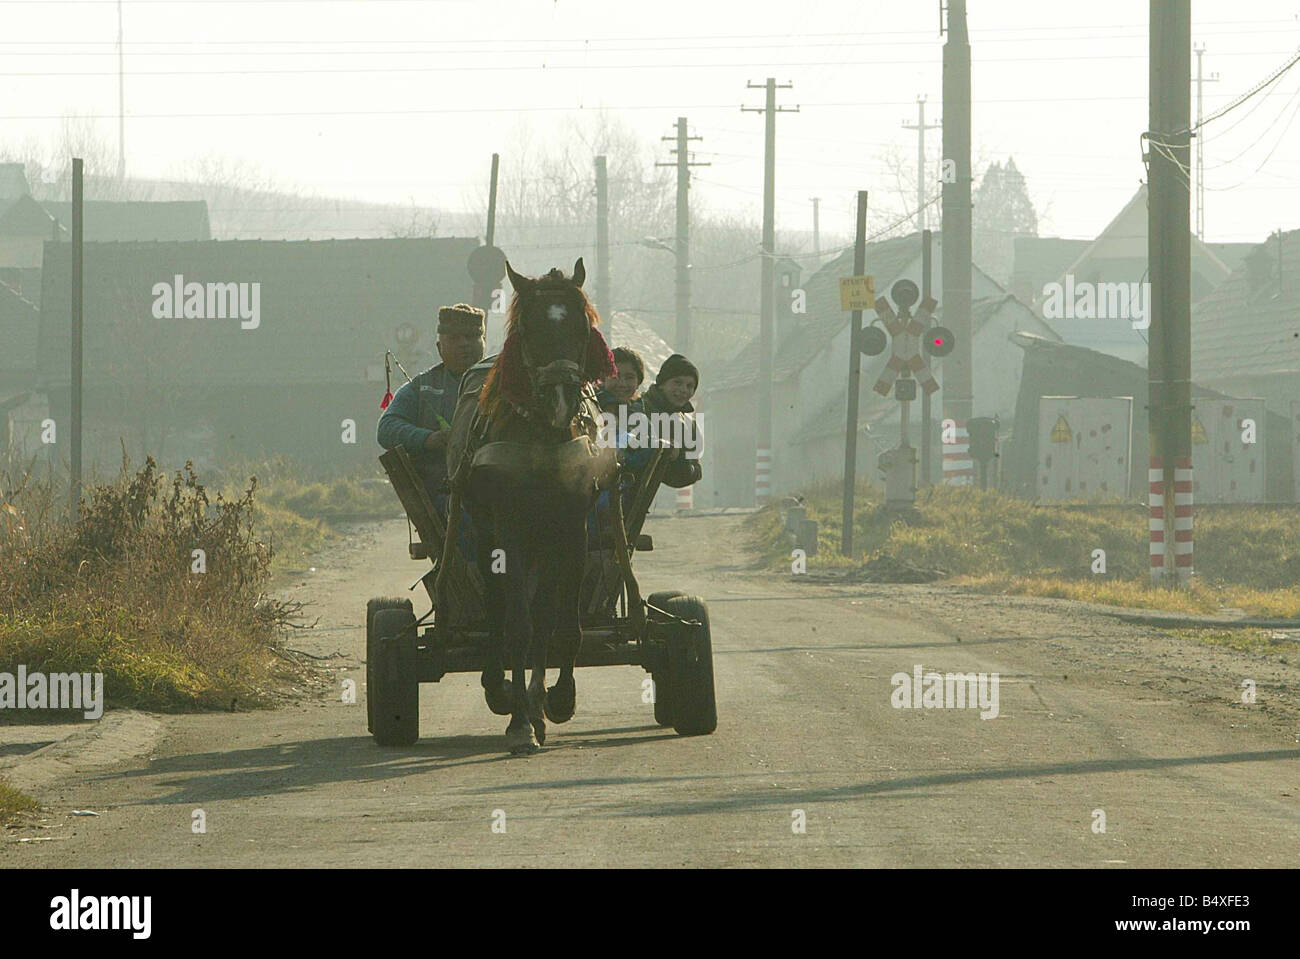 Copsa Mica Romania November 2006 A horse and cart is driven down a street in Copsa Mica Europe s most polluted place Stock Photo